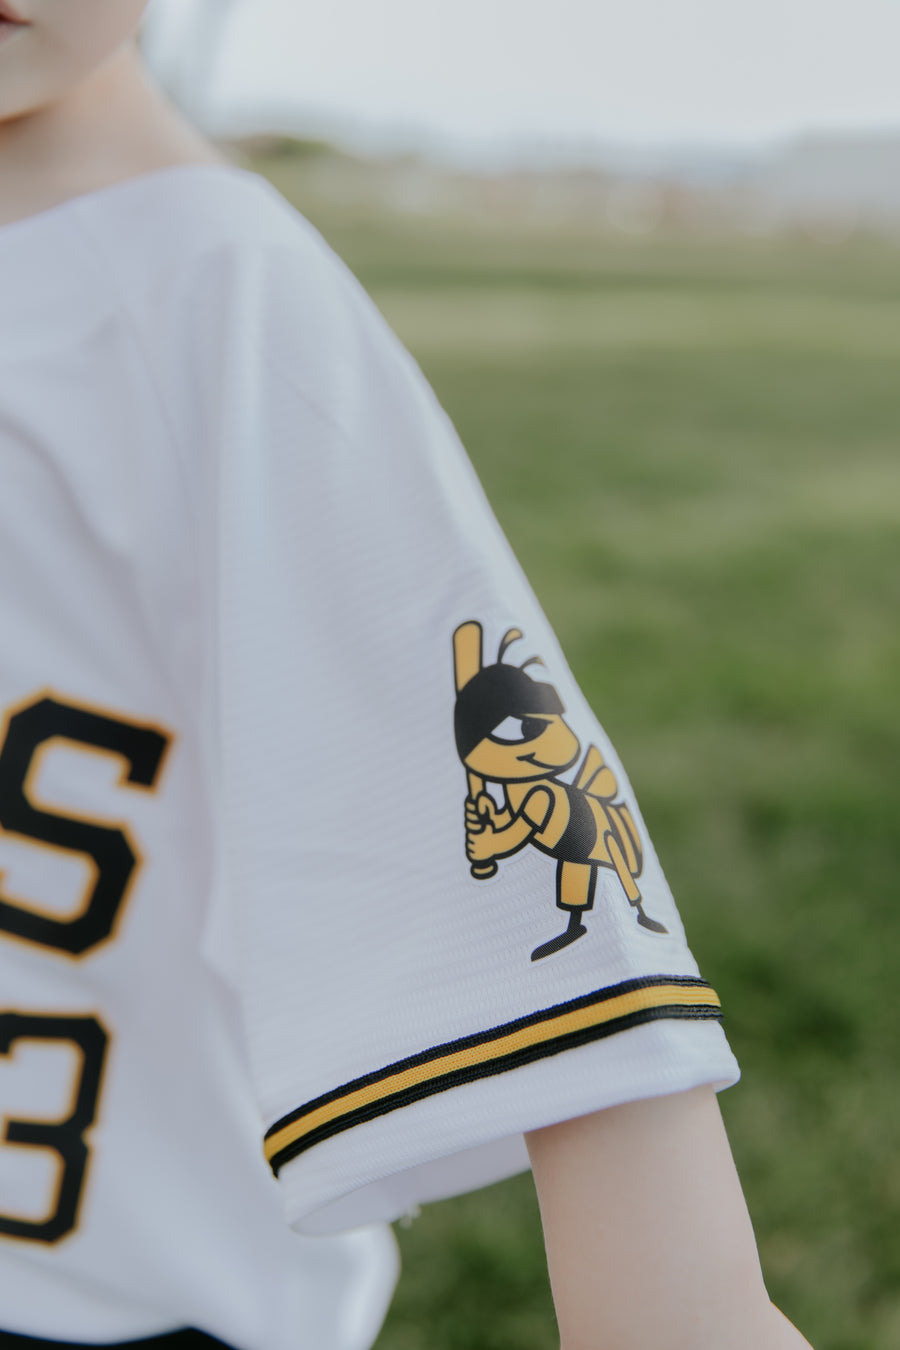 Salt Lake Bees Youth White Wilson Home Mike Trout Replica Jersey